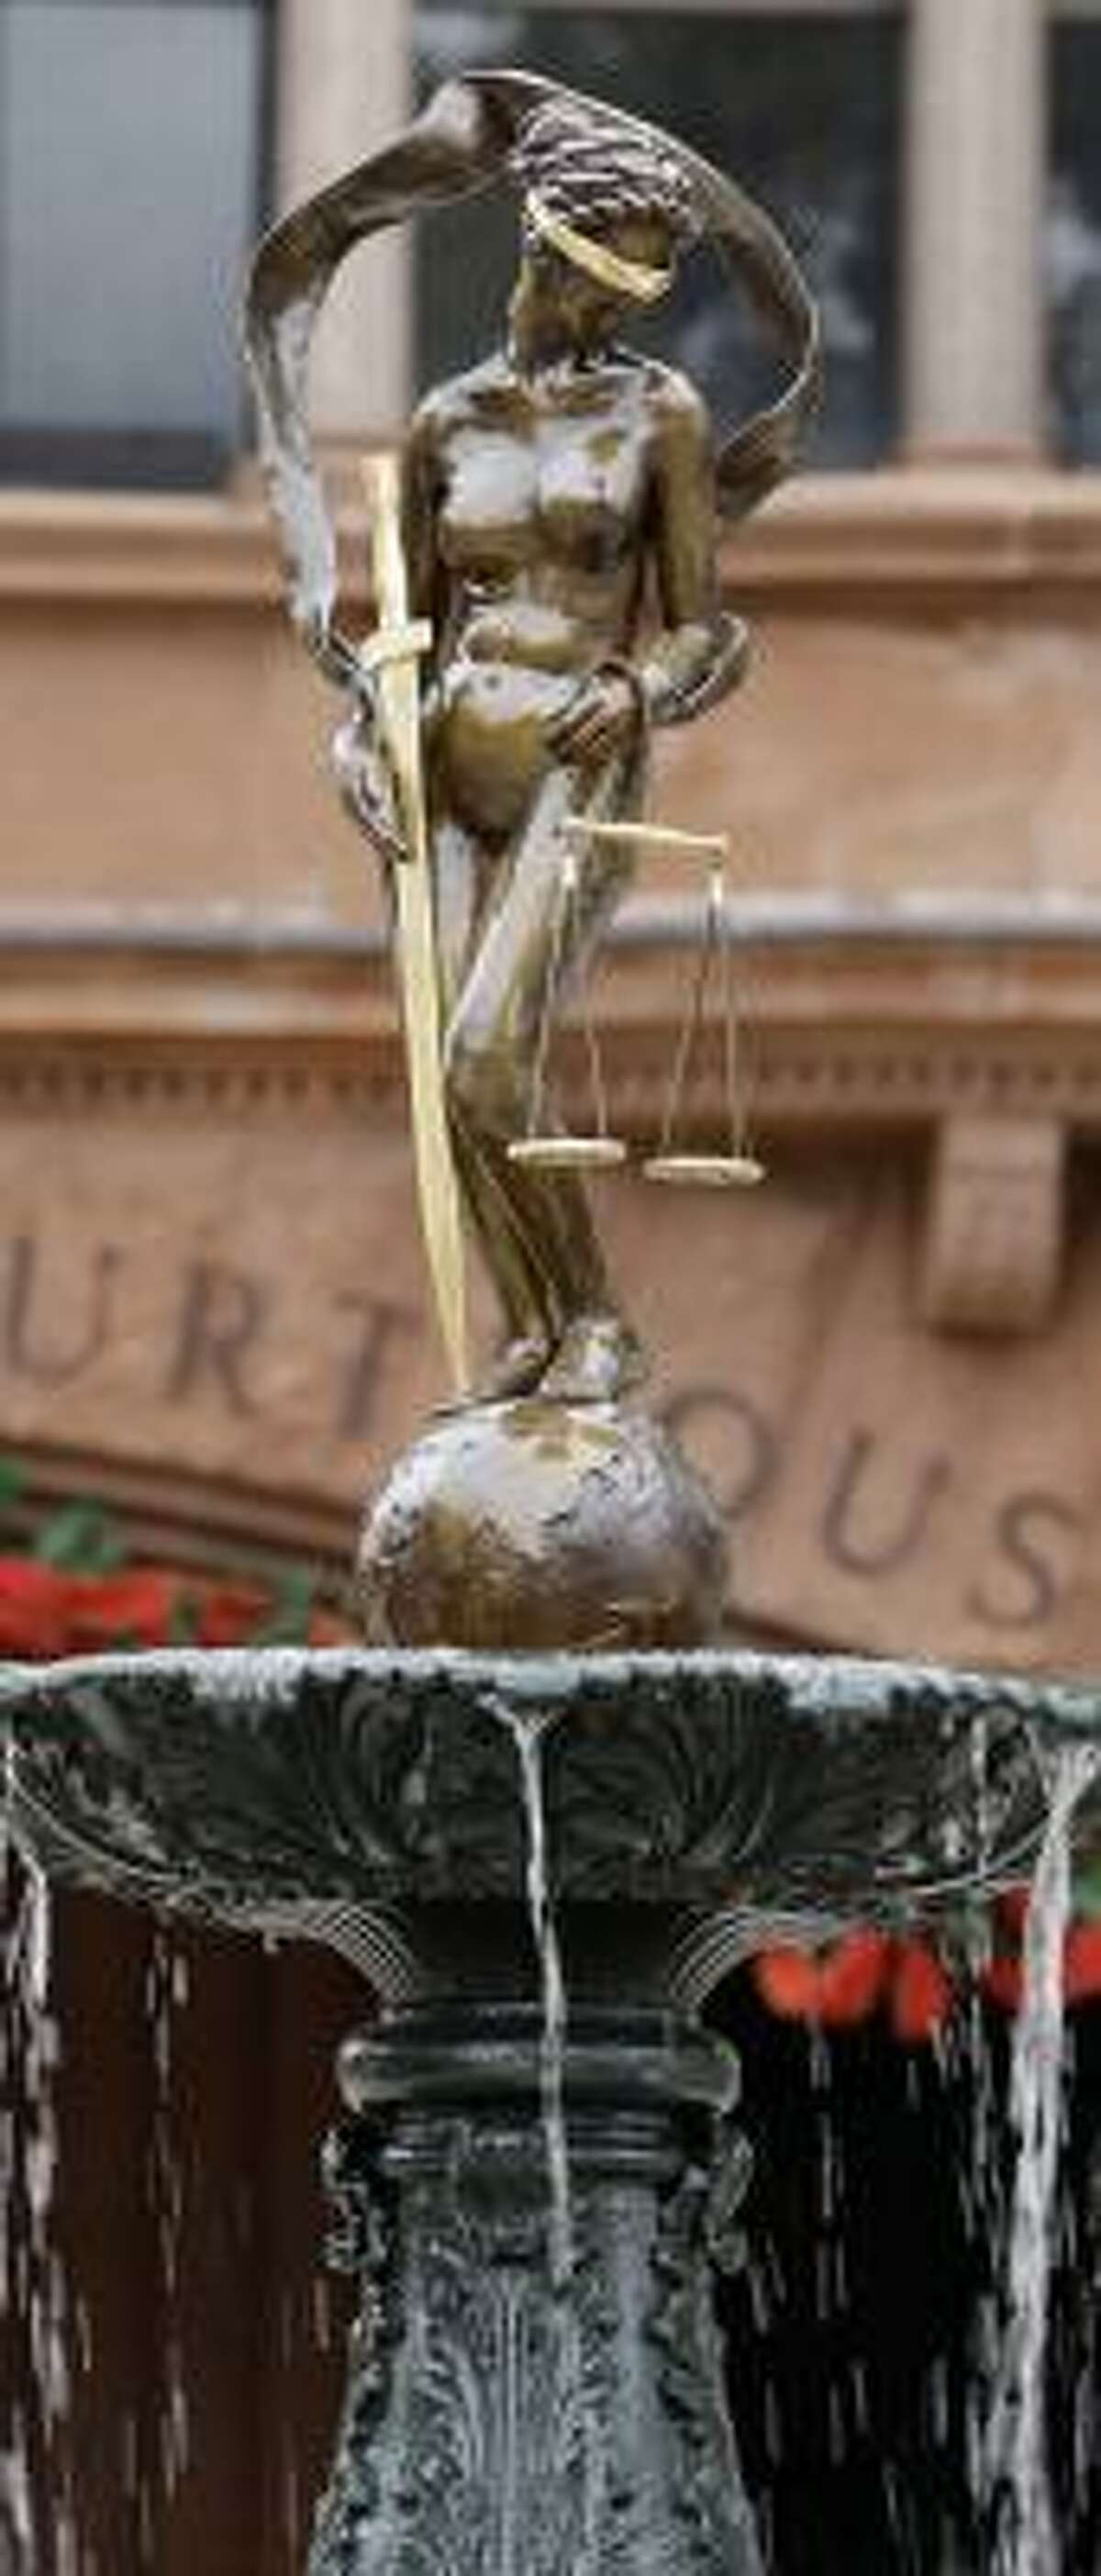 The Lady Justice statue and fountain have been restored at the Bexar County courthouse in San Antonio.